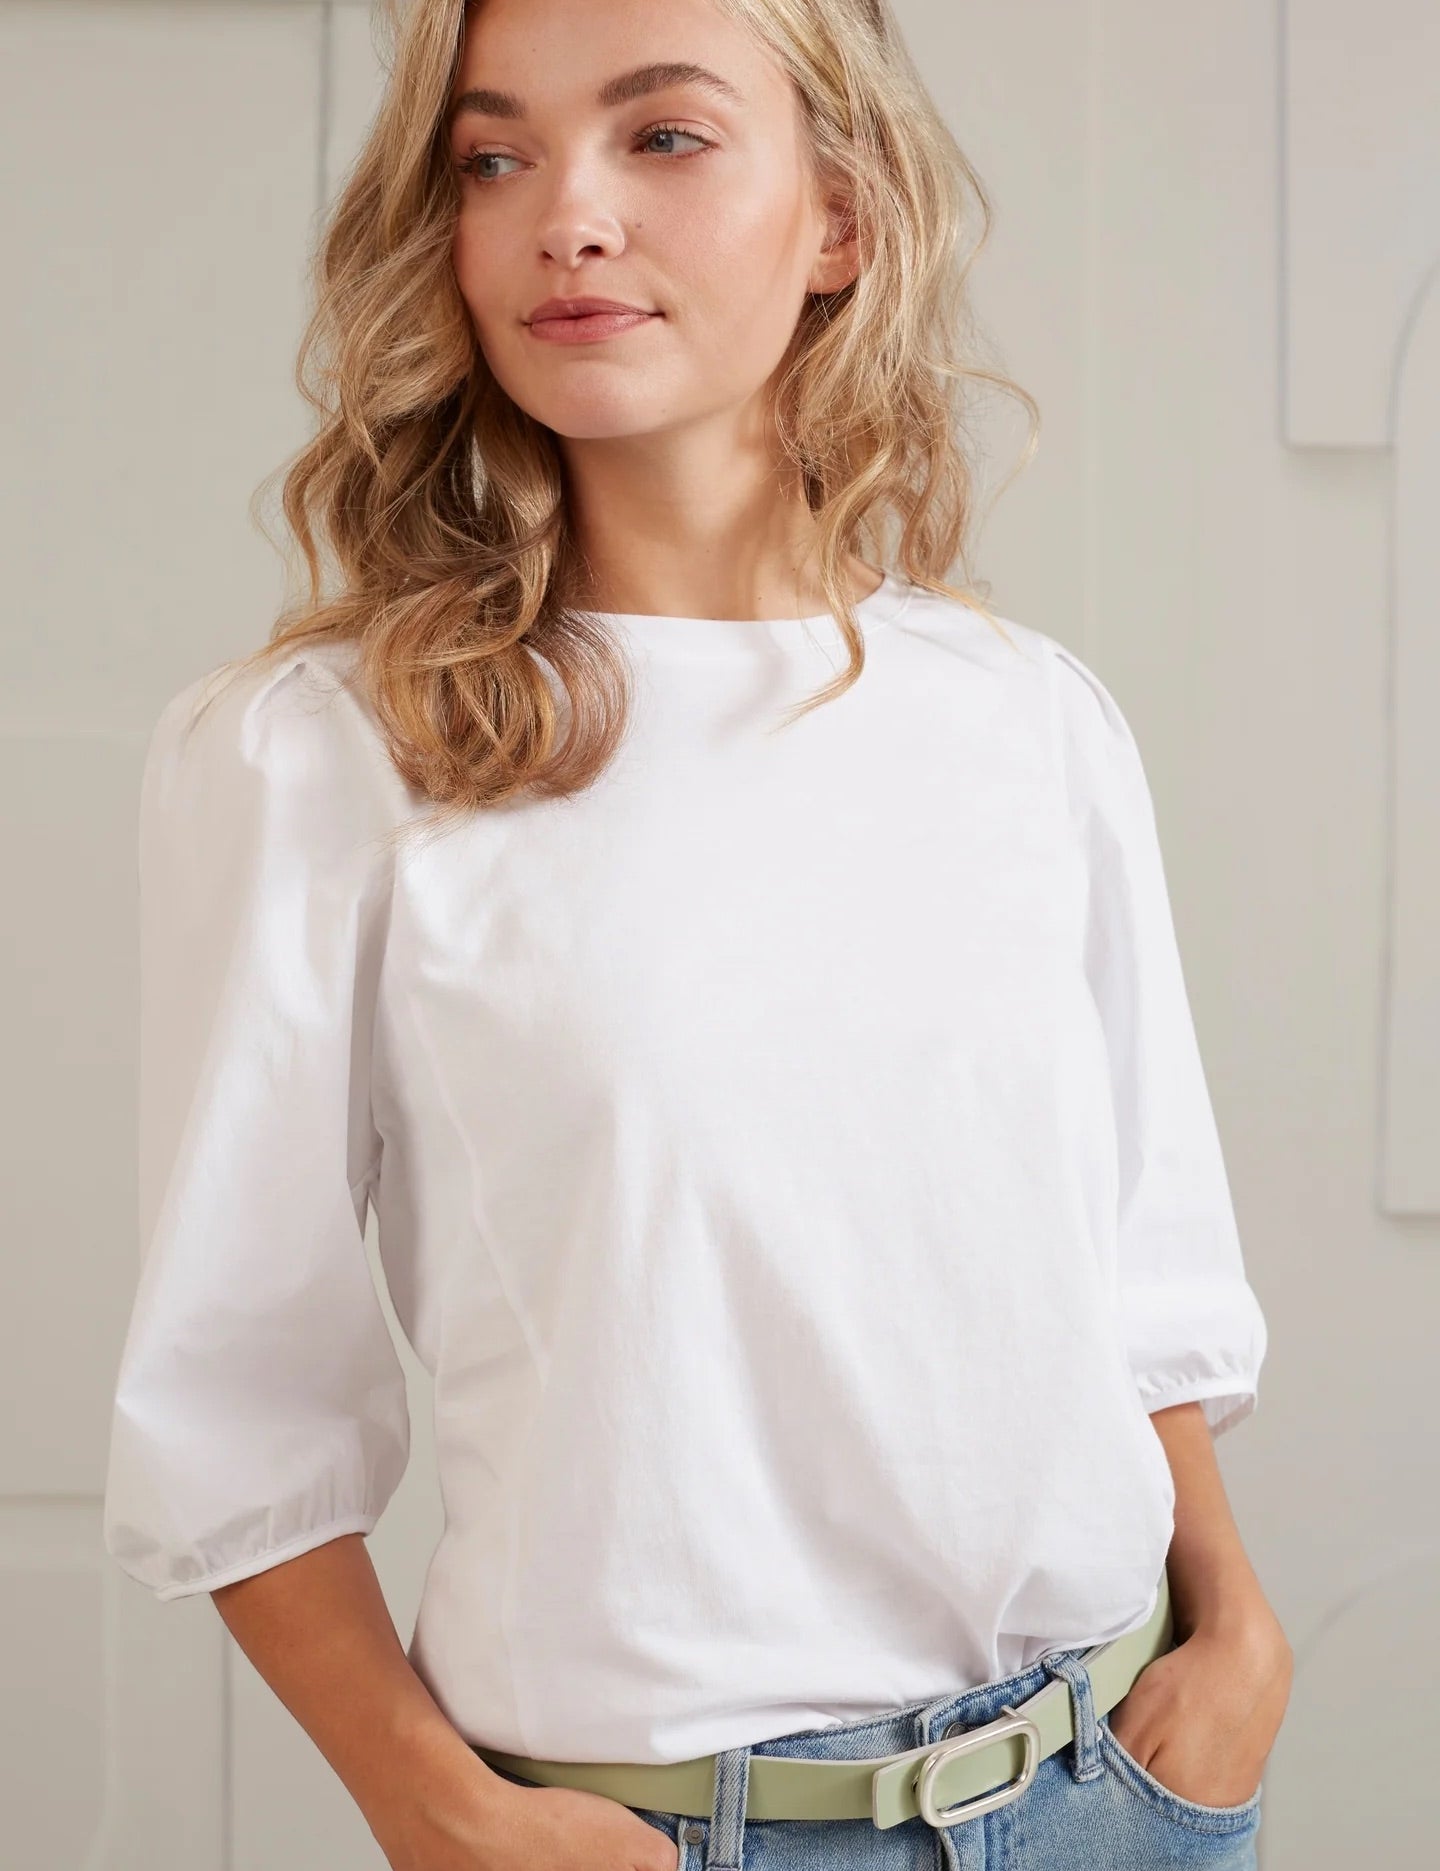 jersey-top-with-round-neck-and-woven-half-long-sleeves-pure-white_e6355dbd-8c55-4eaa-a48b-e006d1c294e8_2880x_jpg.jpg